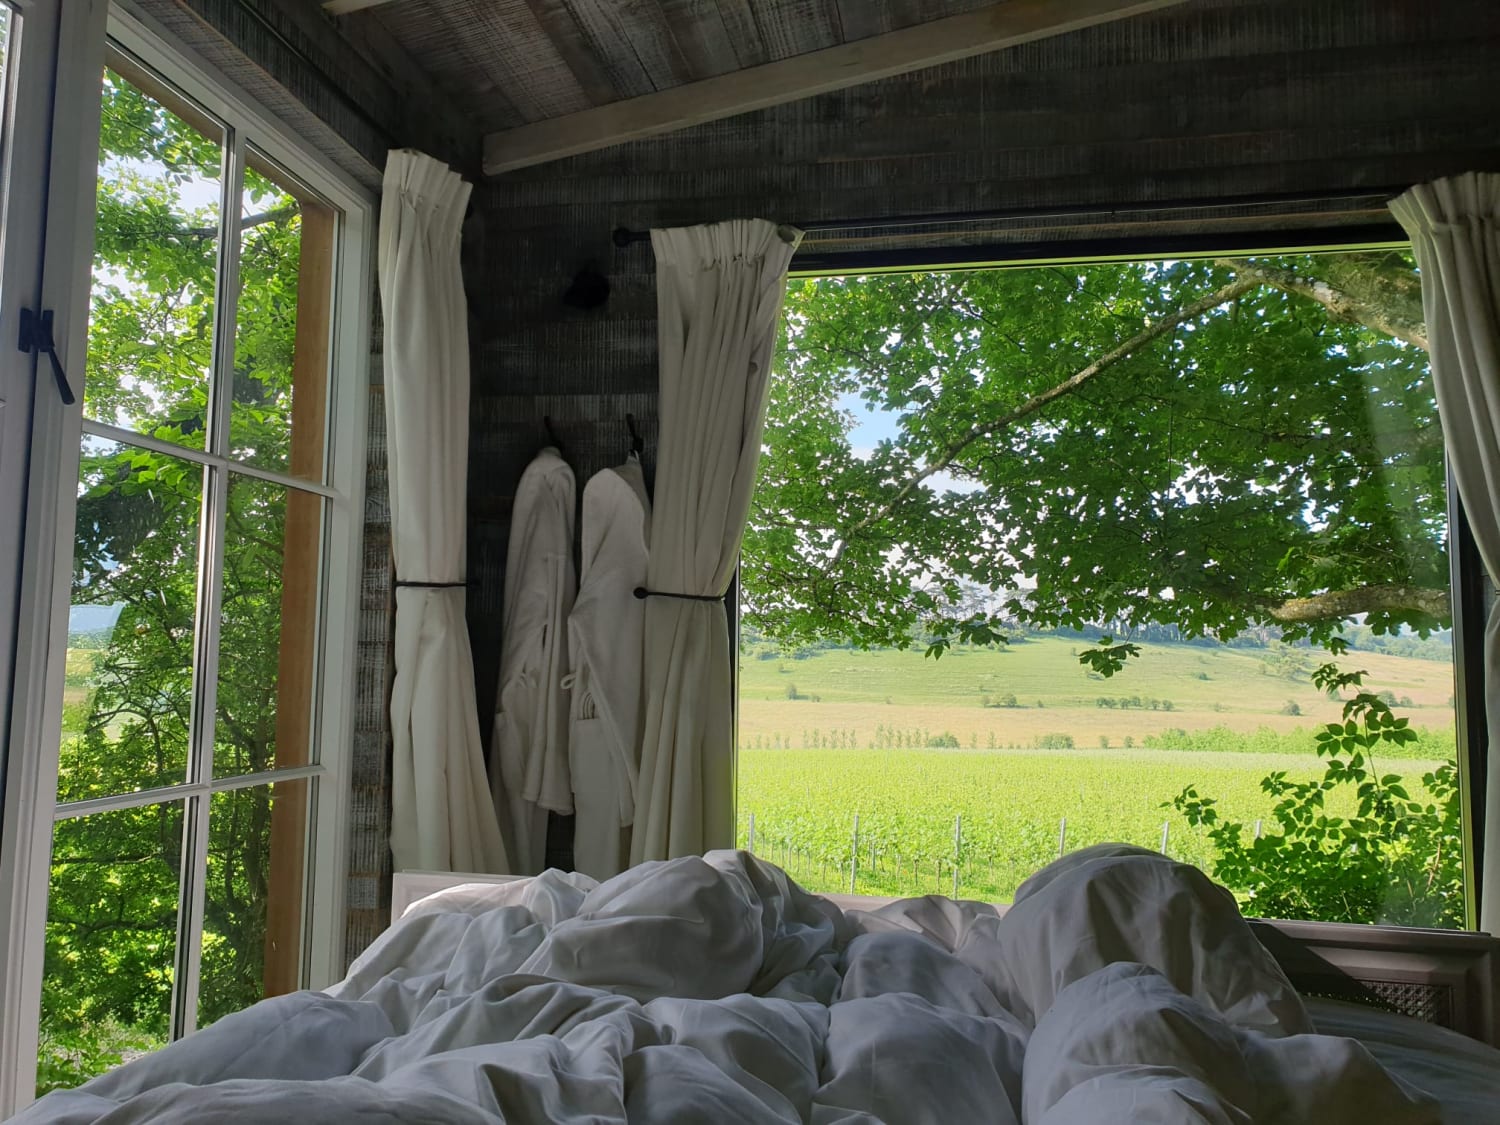 Waking up in a treehouse - Hampshire, UK